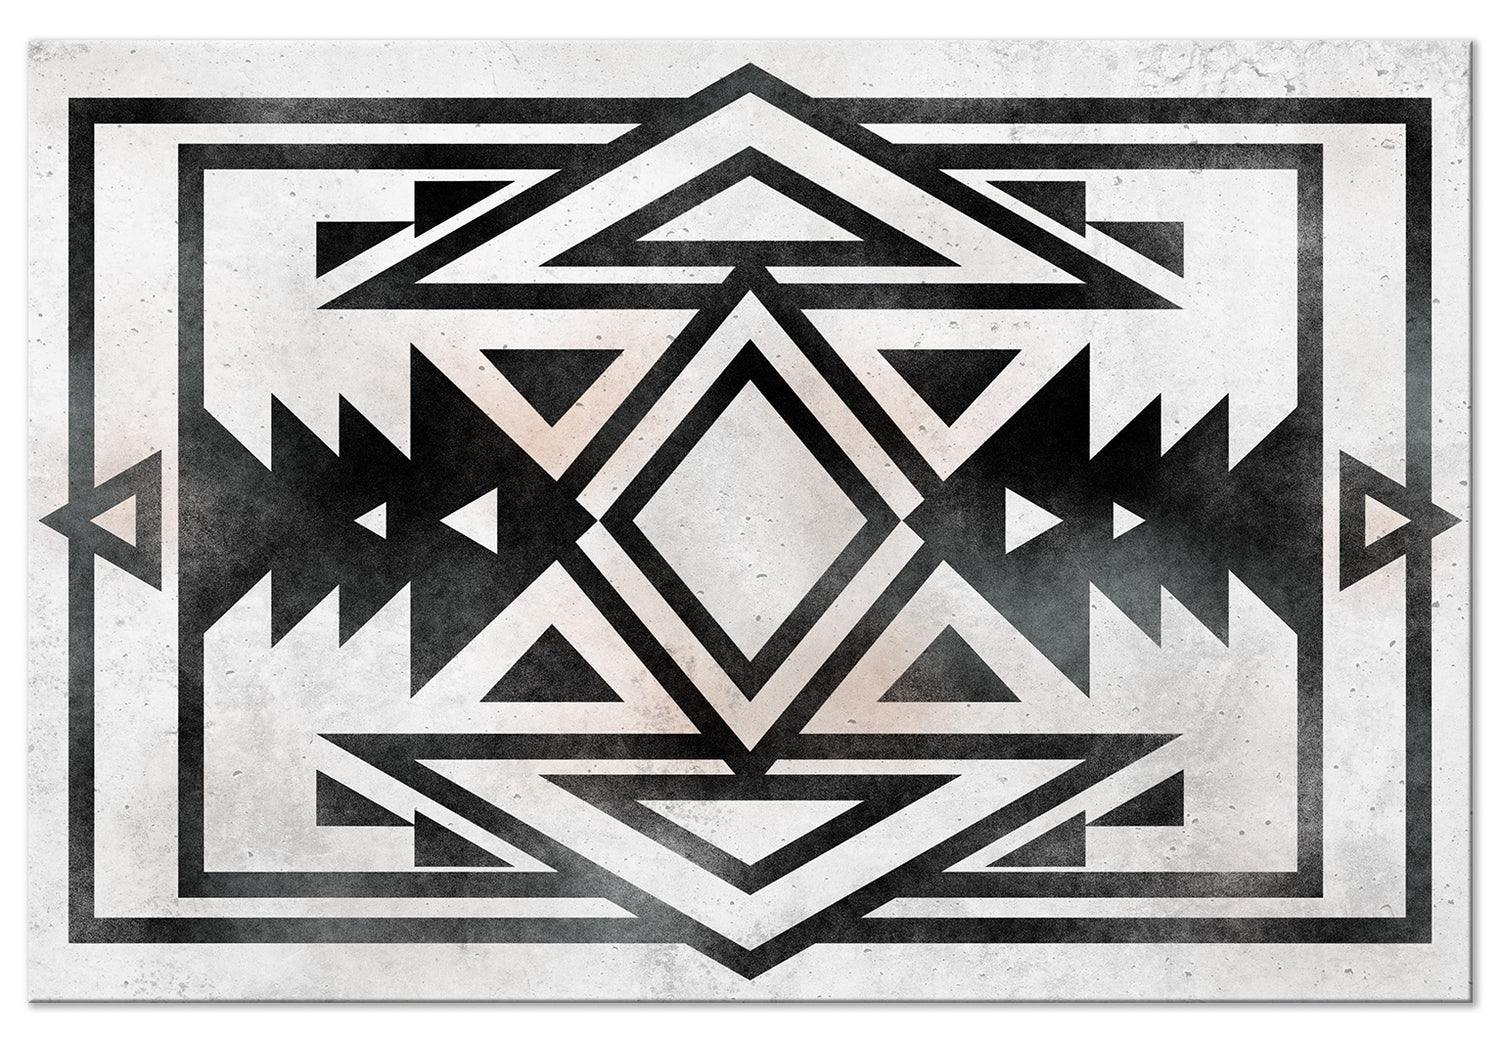 Abstract Canvas Wall Art - Ethnic Pattern